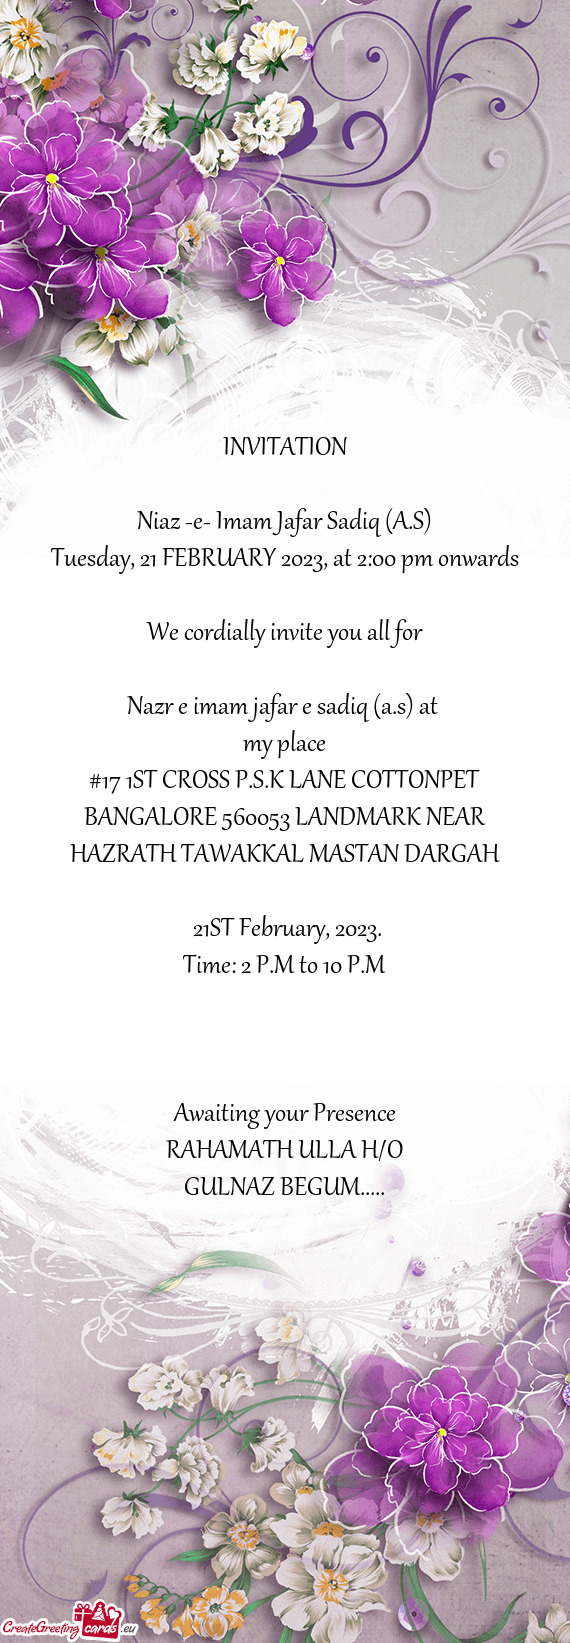 Tuesday, 21 FEBRUARY 2023, at 2:00 pm onwards